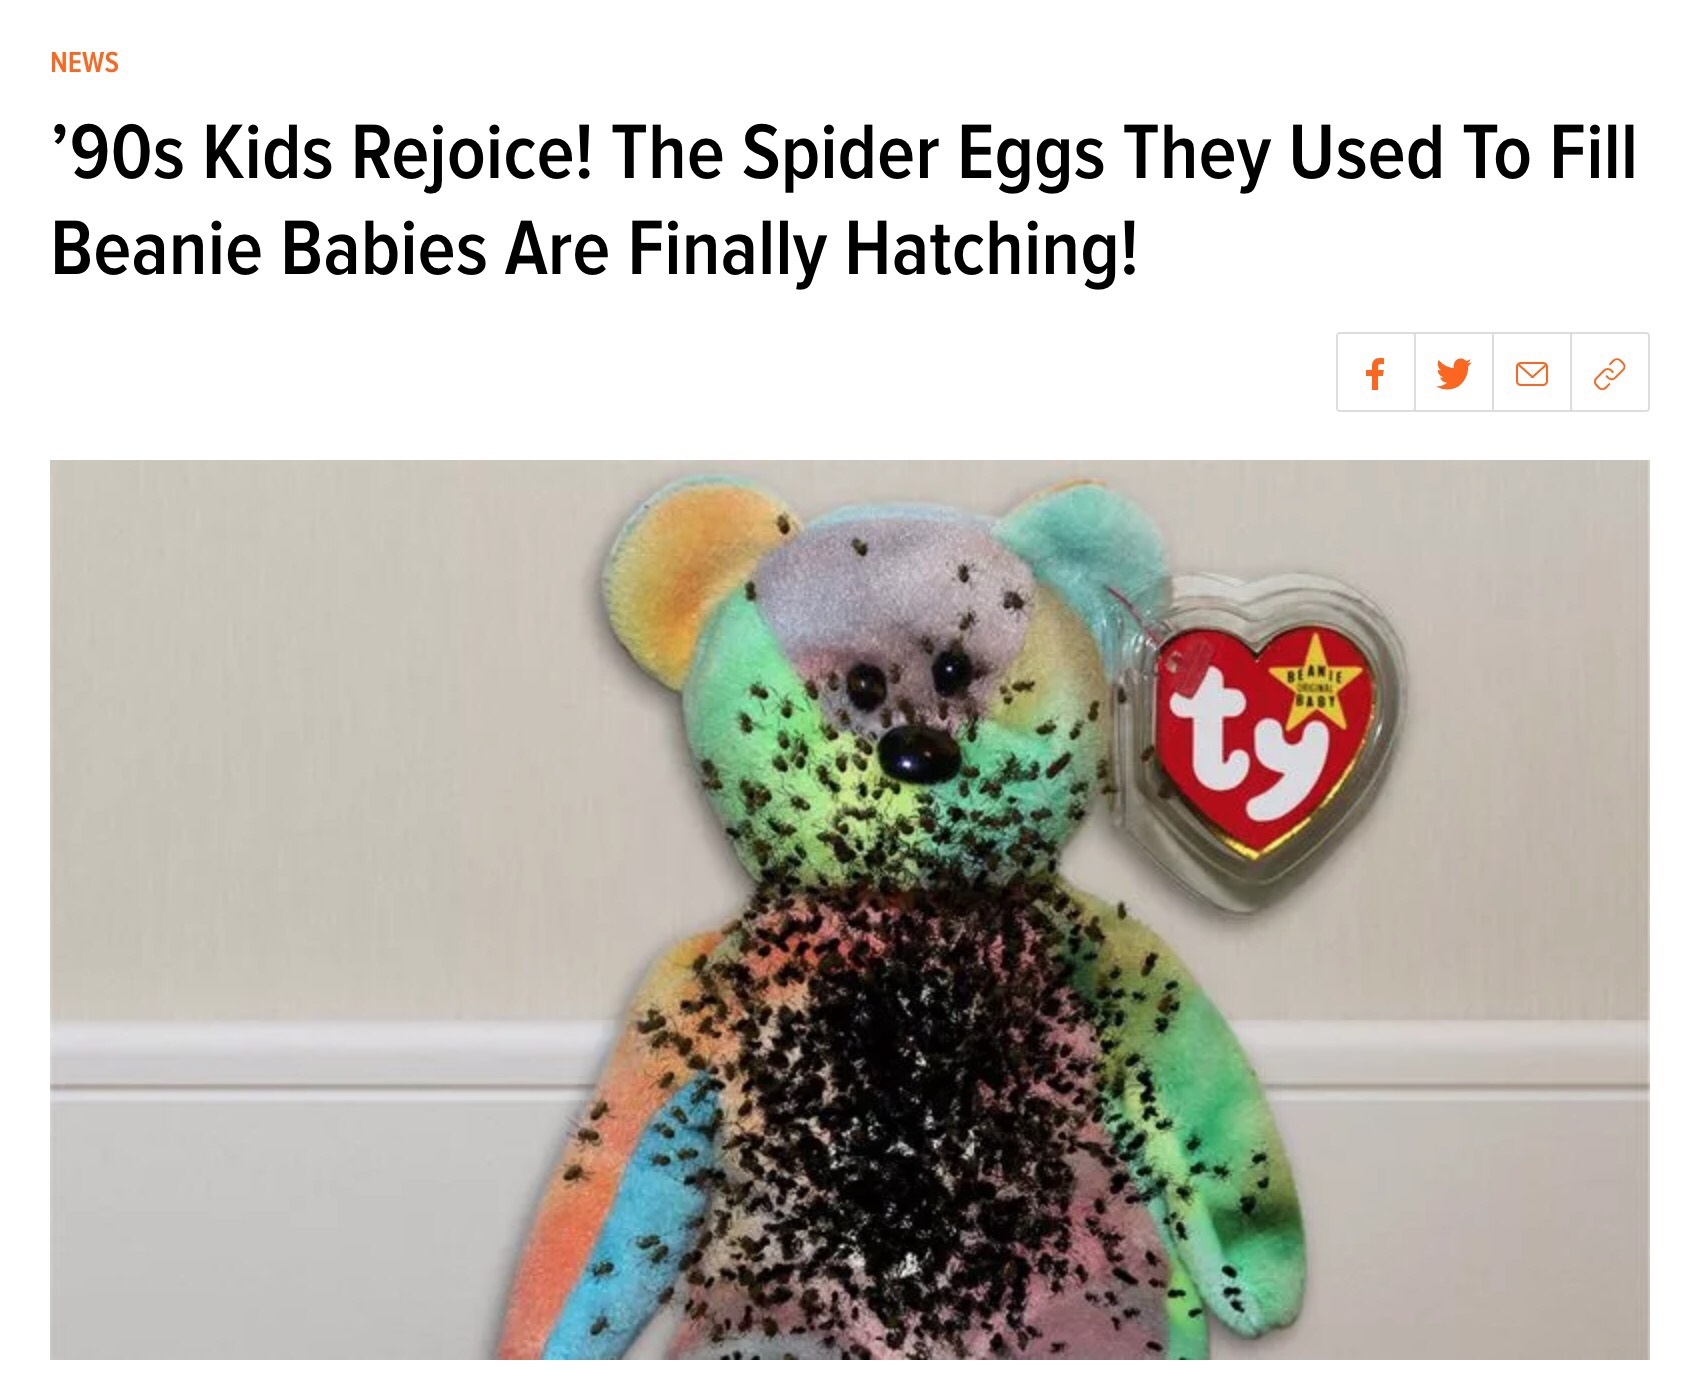 Random Pics - 90's beanie babies - News '90s Kids Rejoice! The Spider Eggs They Used To Fill Beanie Babies Are Finally Hatching! 8131